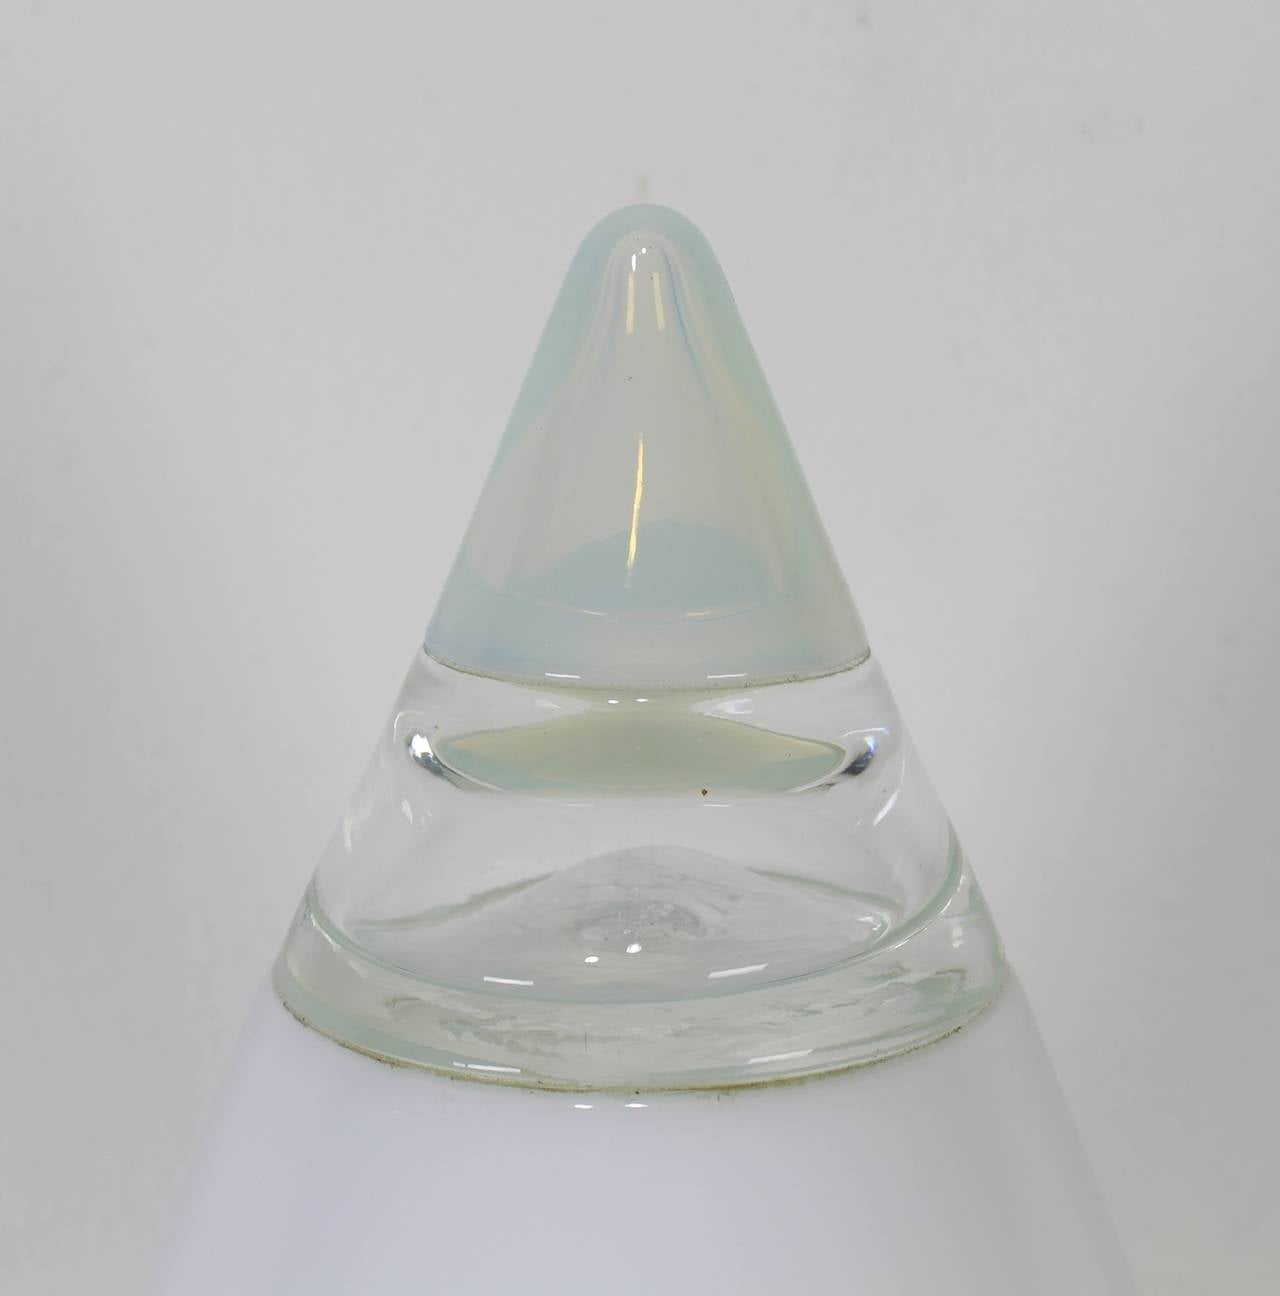 Typical Italian floor glass lamp.
Opalescent glass with white glass top,
metal base.
Designed by G. Toso.
Model: T46.

Express parcel shipment is advised.